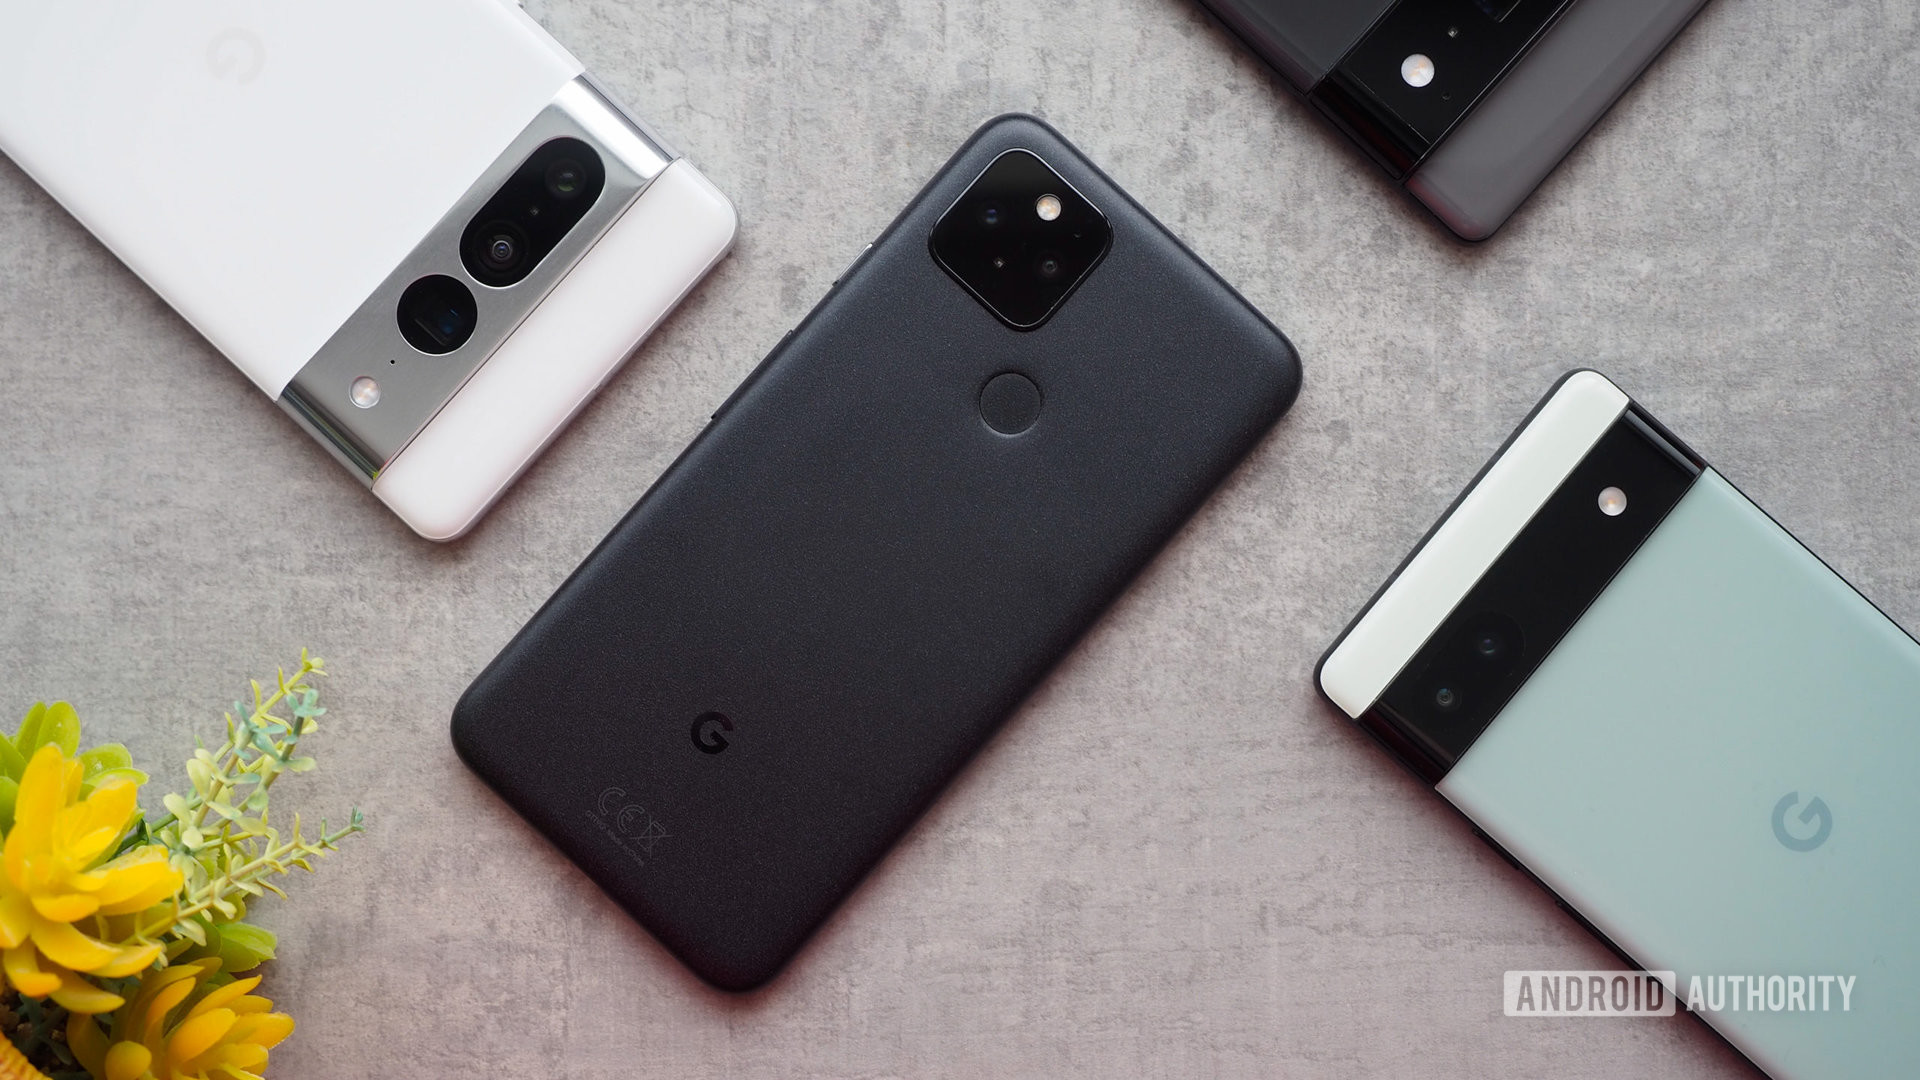 Google Pixel 5 laying in the middle of the Pixel 6a, Pixel 6 Pro, and Pixel 7 Pro